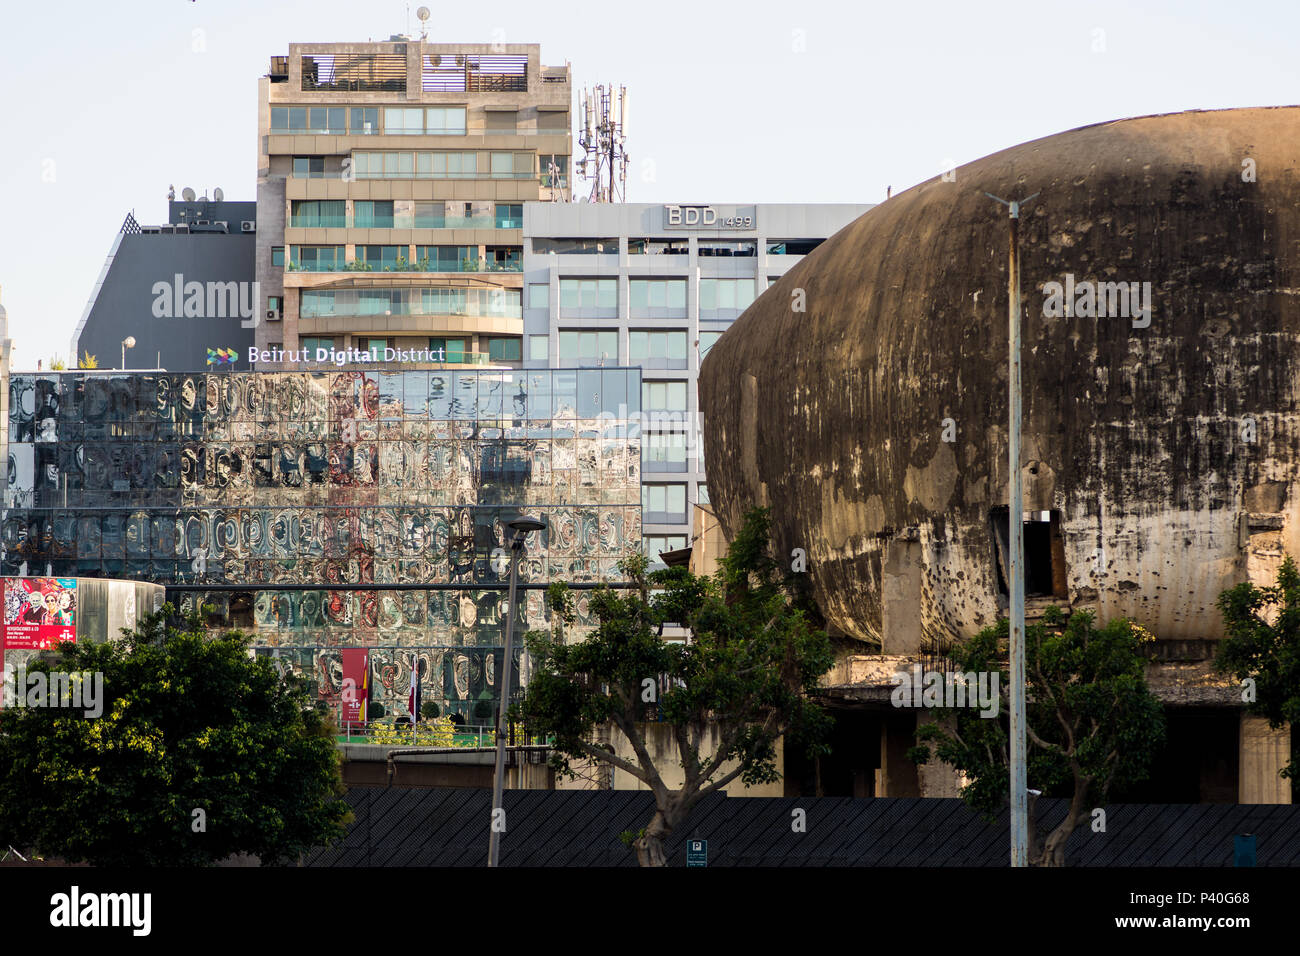 War-scarred egg shaped building in Beirut Stock Photo